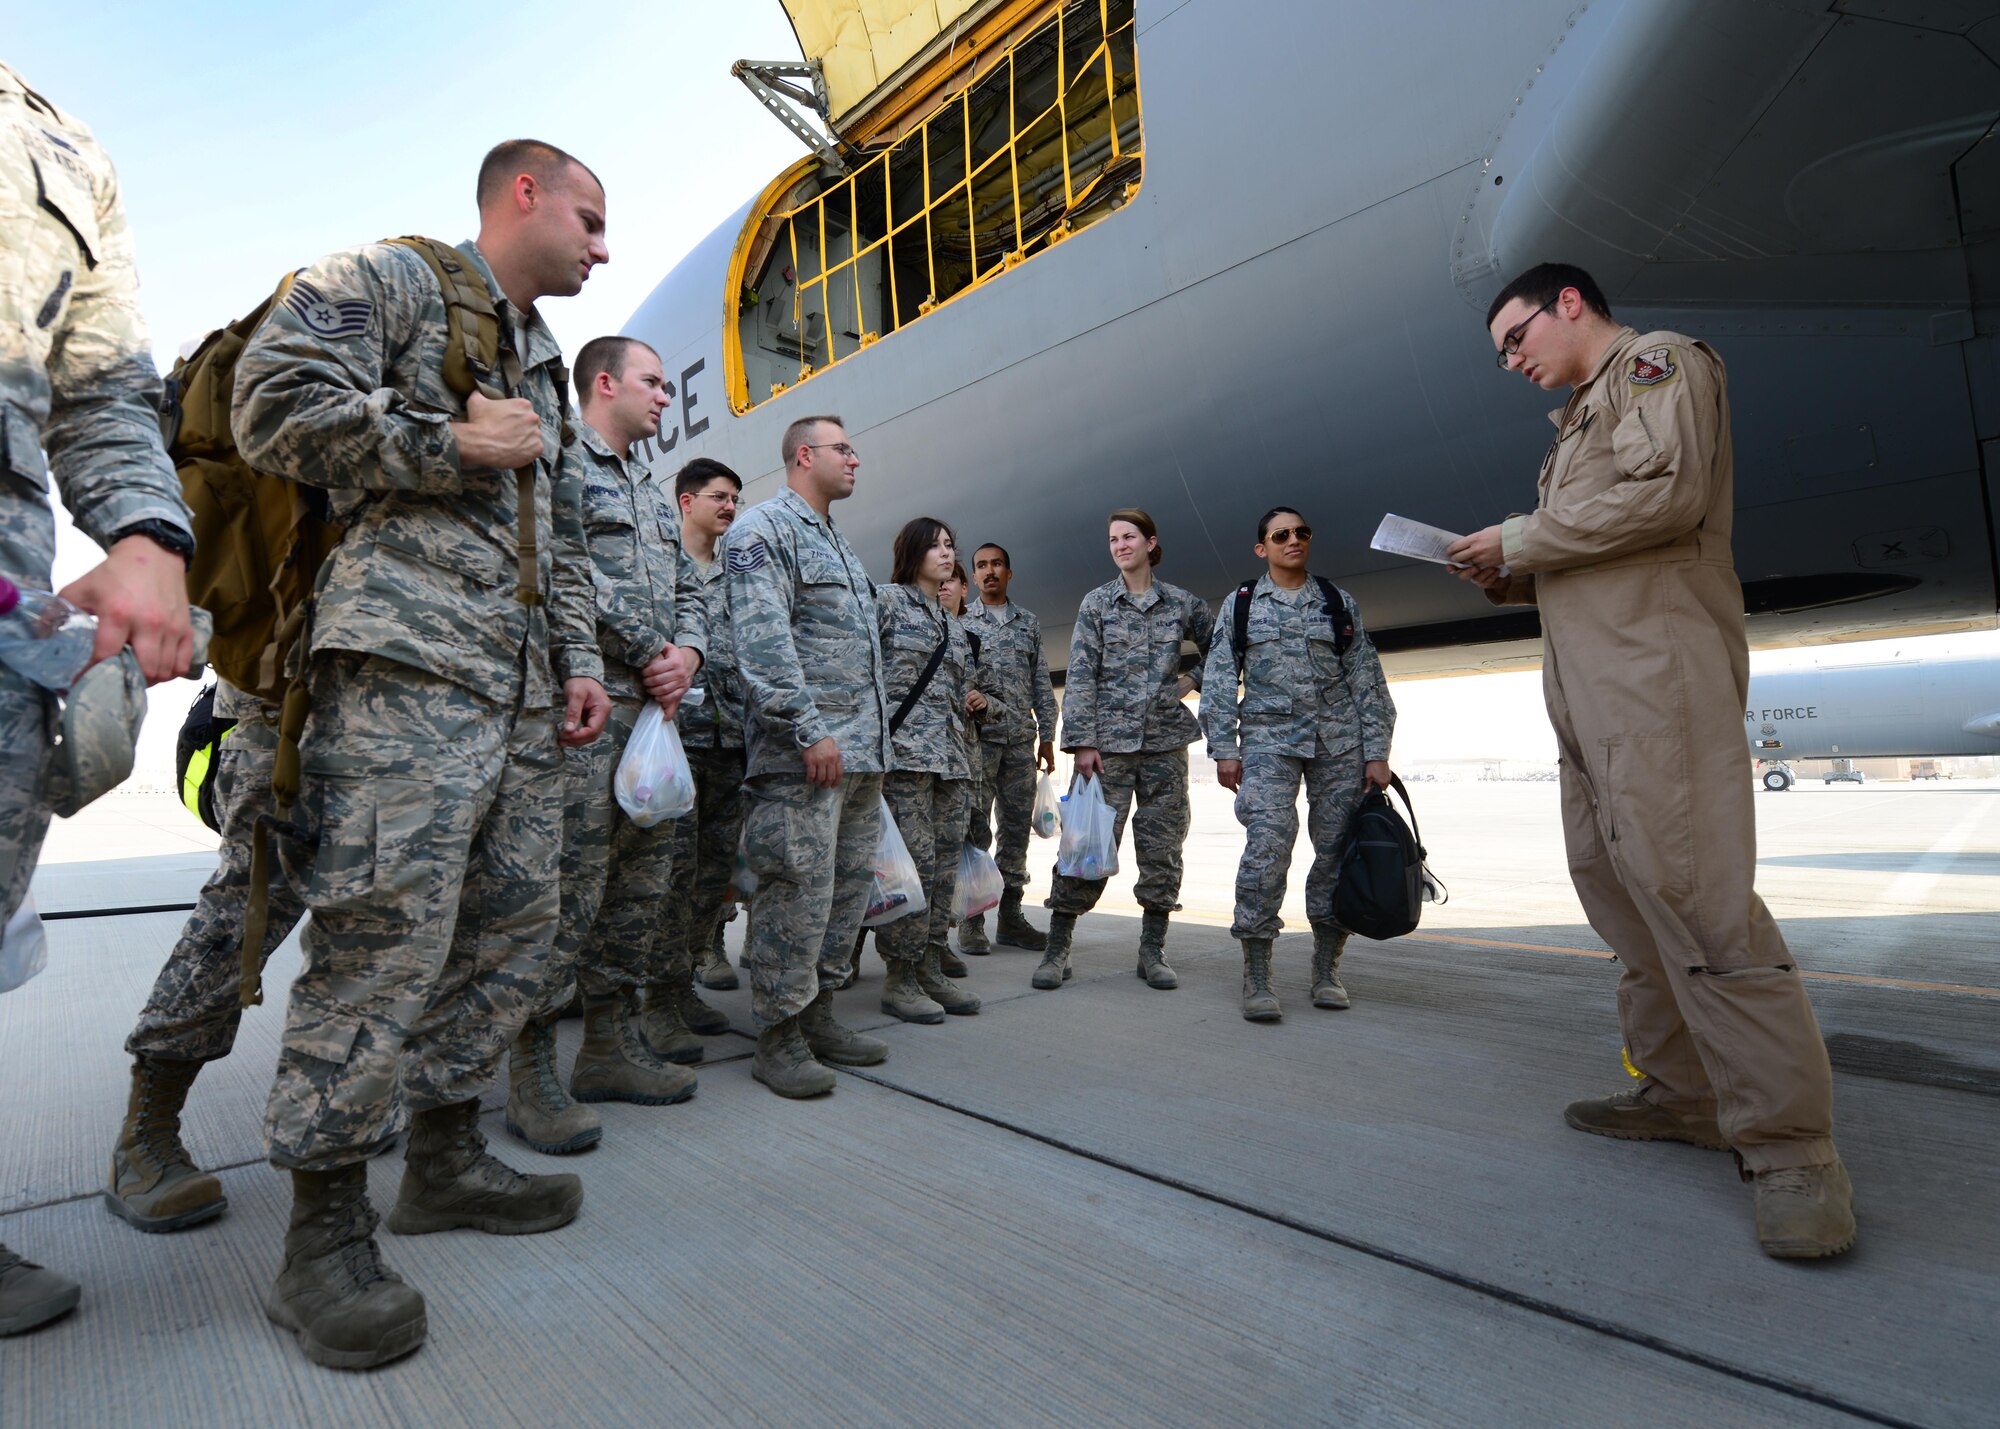 An Airman from the 340th Expeditionary Refueling Squadron gives a briefing to members of the 379th Air Expeditionary Wing at Al Udeid Air Base, Qatar Oct. 27, 2016. The members were part of an incentive flight onboard a KC-135 Stratotanker during which they witnessed the refueling of F-16 Fighting Falcons. (U.S. Air Force photo by Senior Airman Miles Wilson)
